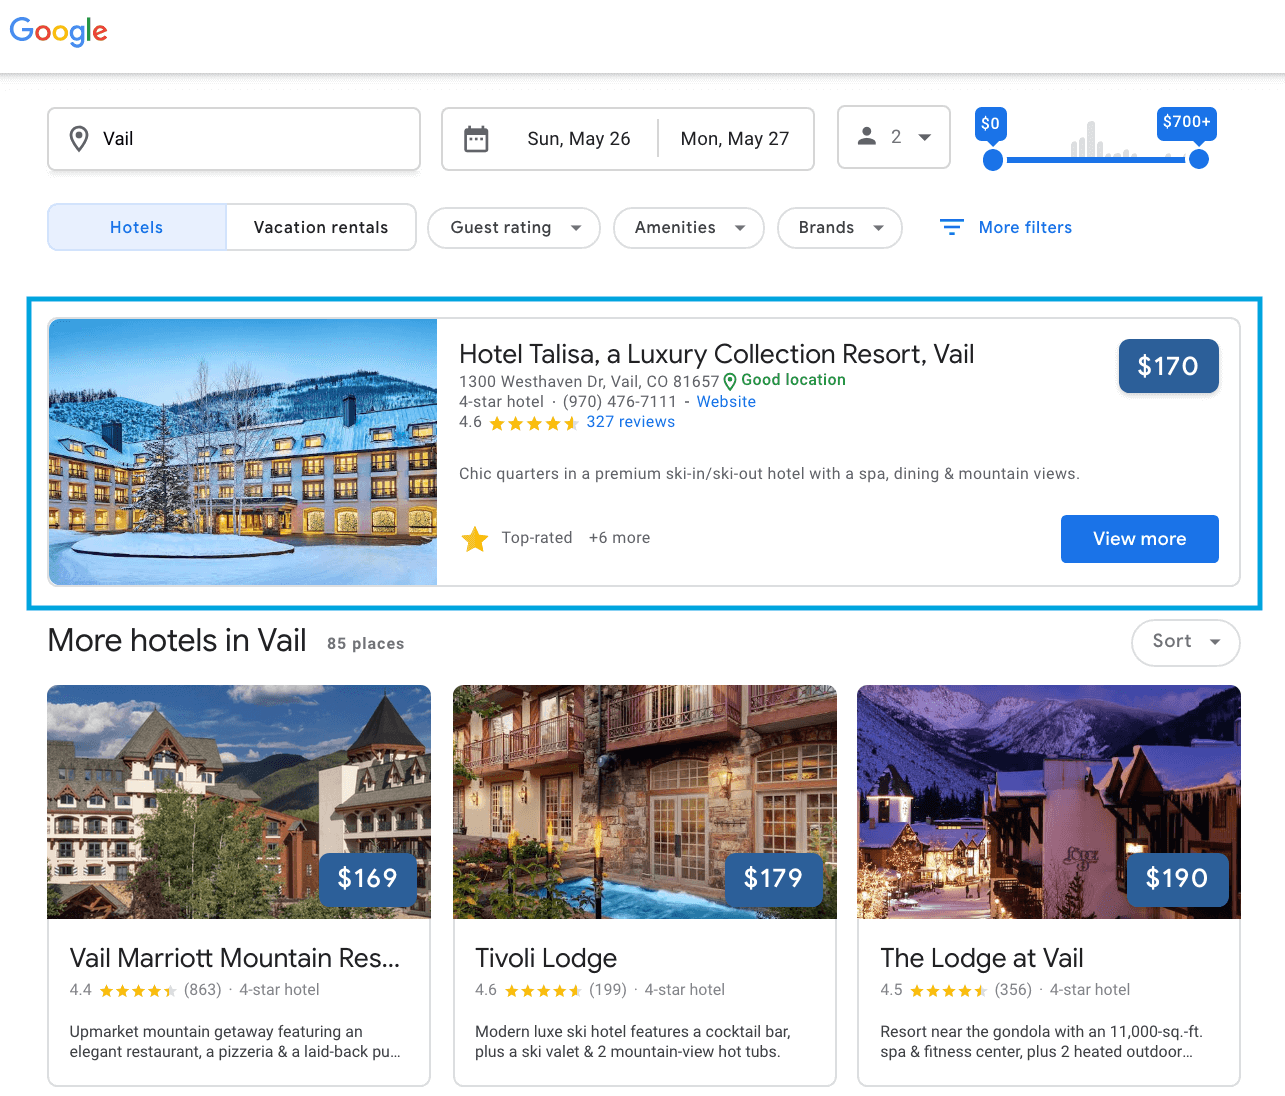 New Pinned Hotel Card on Google Hotel Search